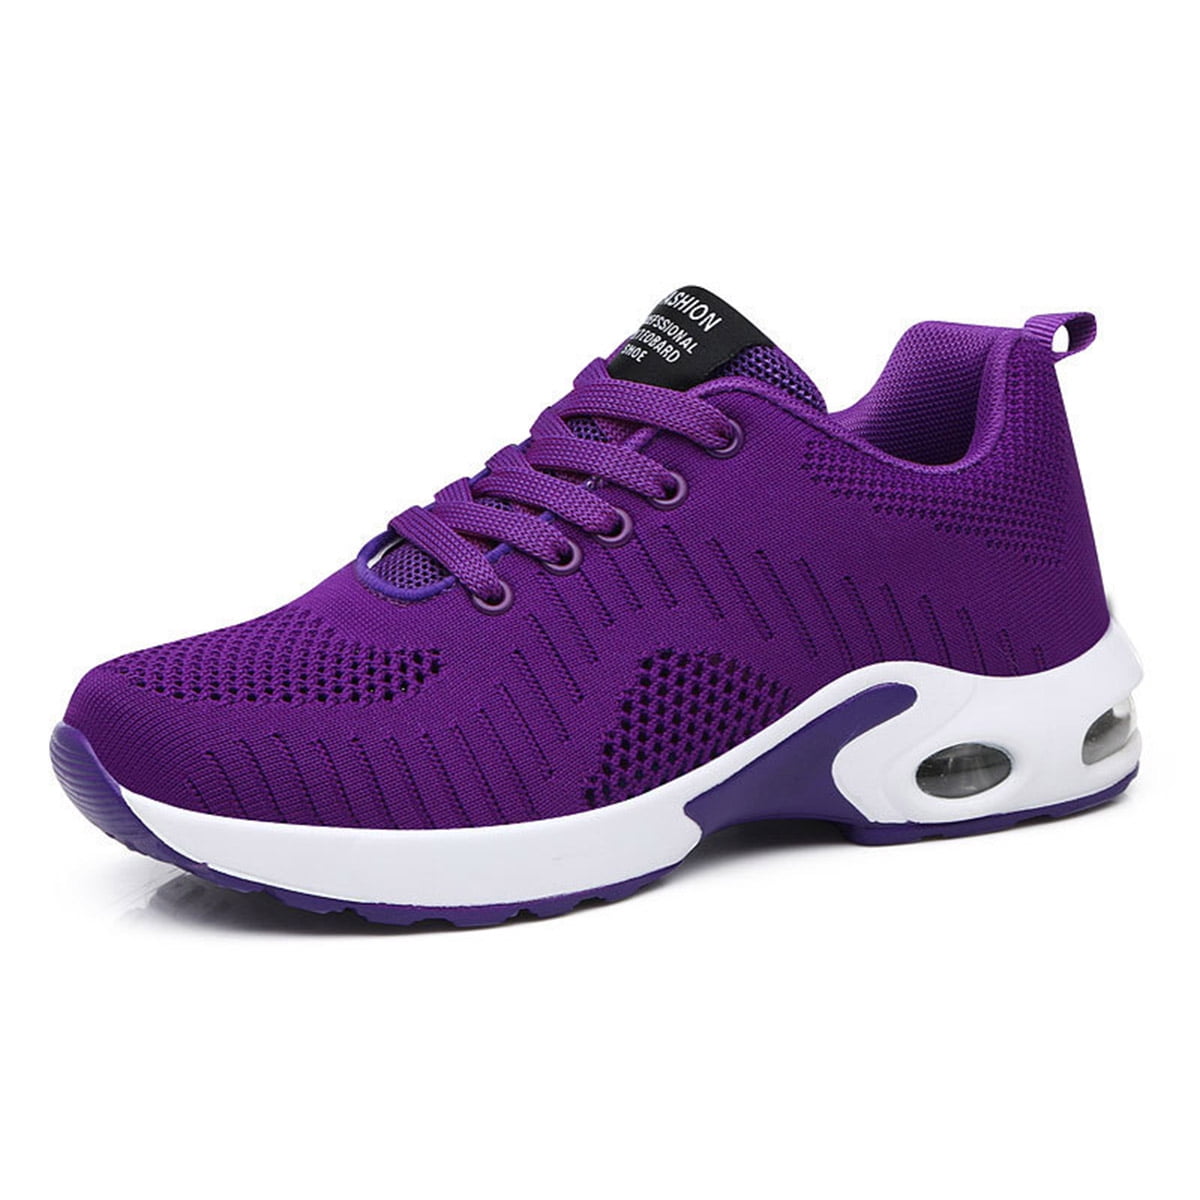 Details about   Women's Comfort Sports Running Shoes Breathable Mesh Walking Slip-On Sneakers B 